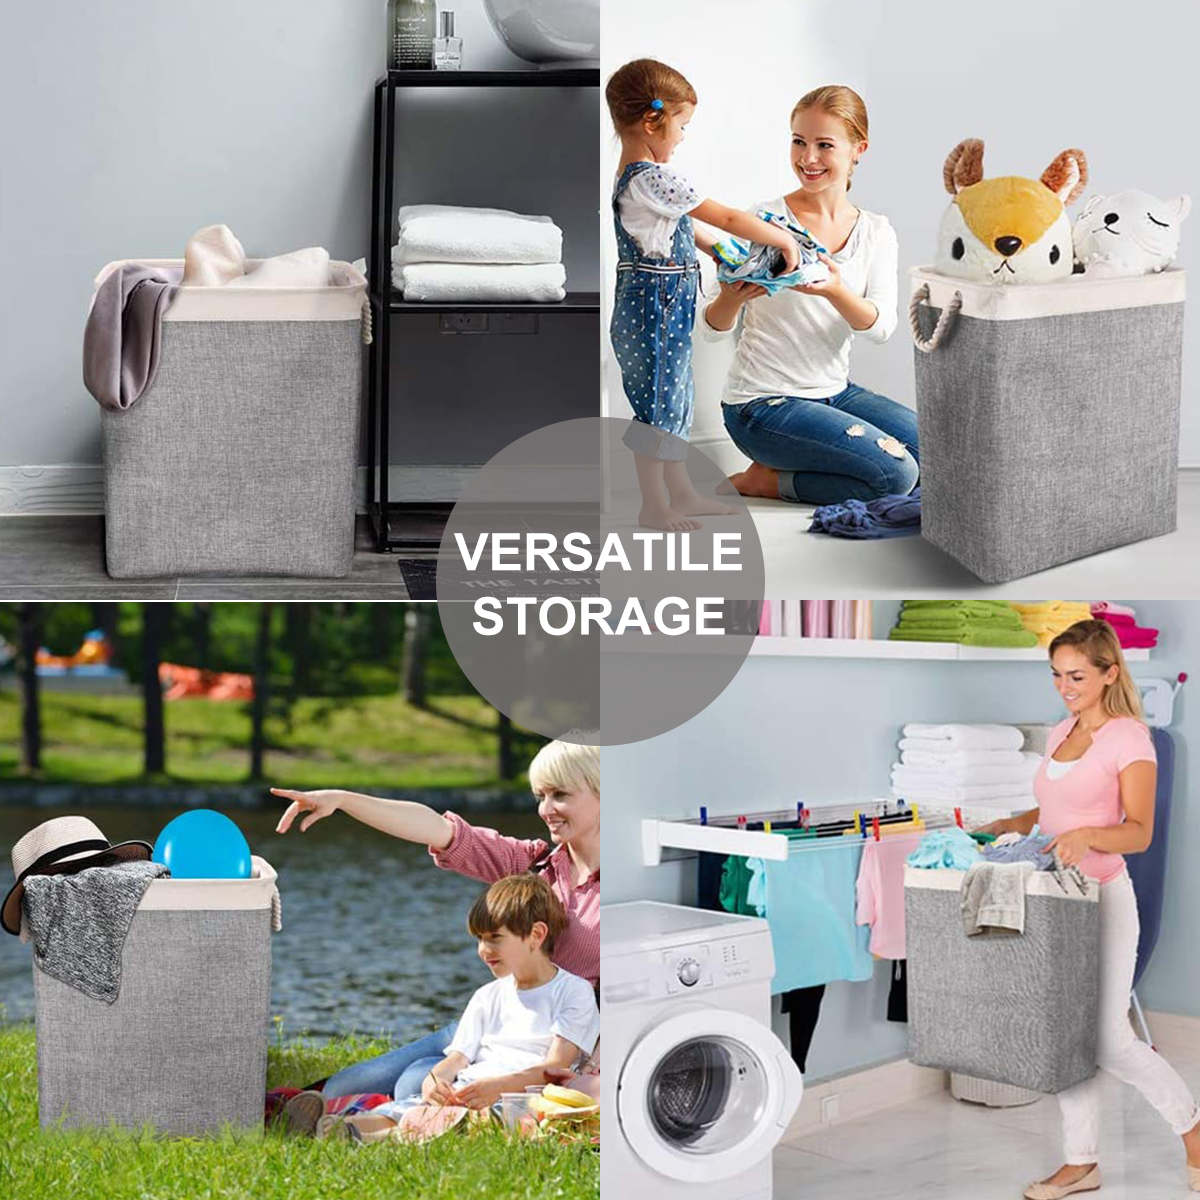 Laundry-Baskets-with-Handles-Collapsible-Linen-Hampers-Bedroom-Foldable-Storage-Laundry-Hamper-for-T-1788699-8